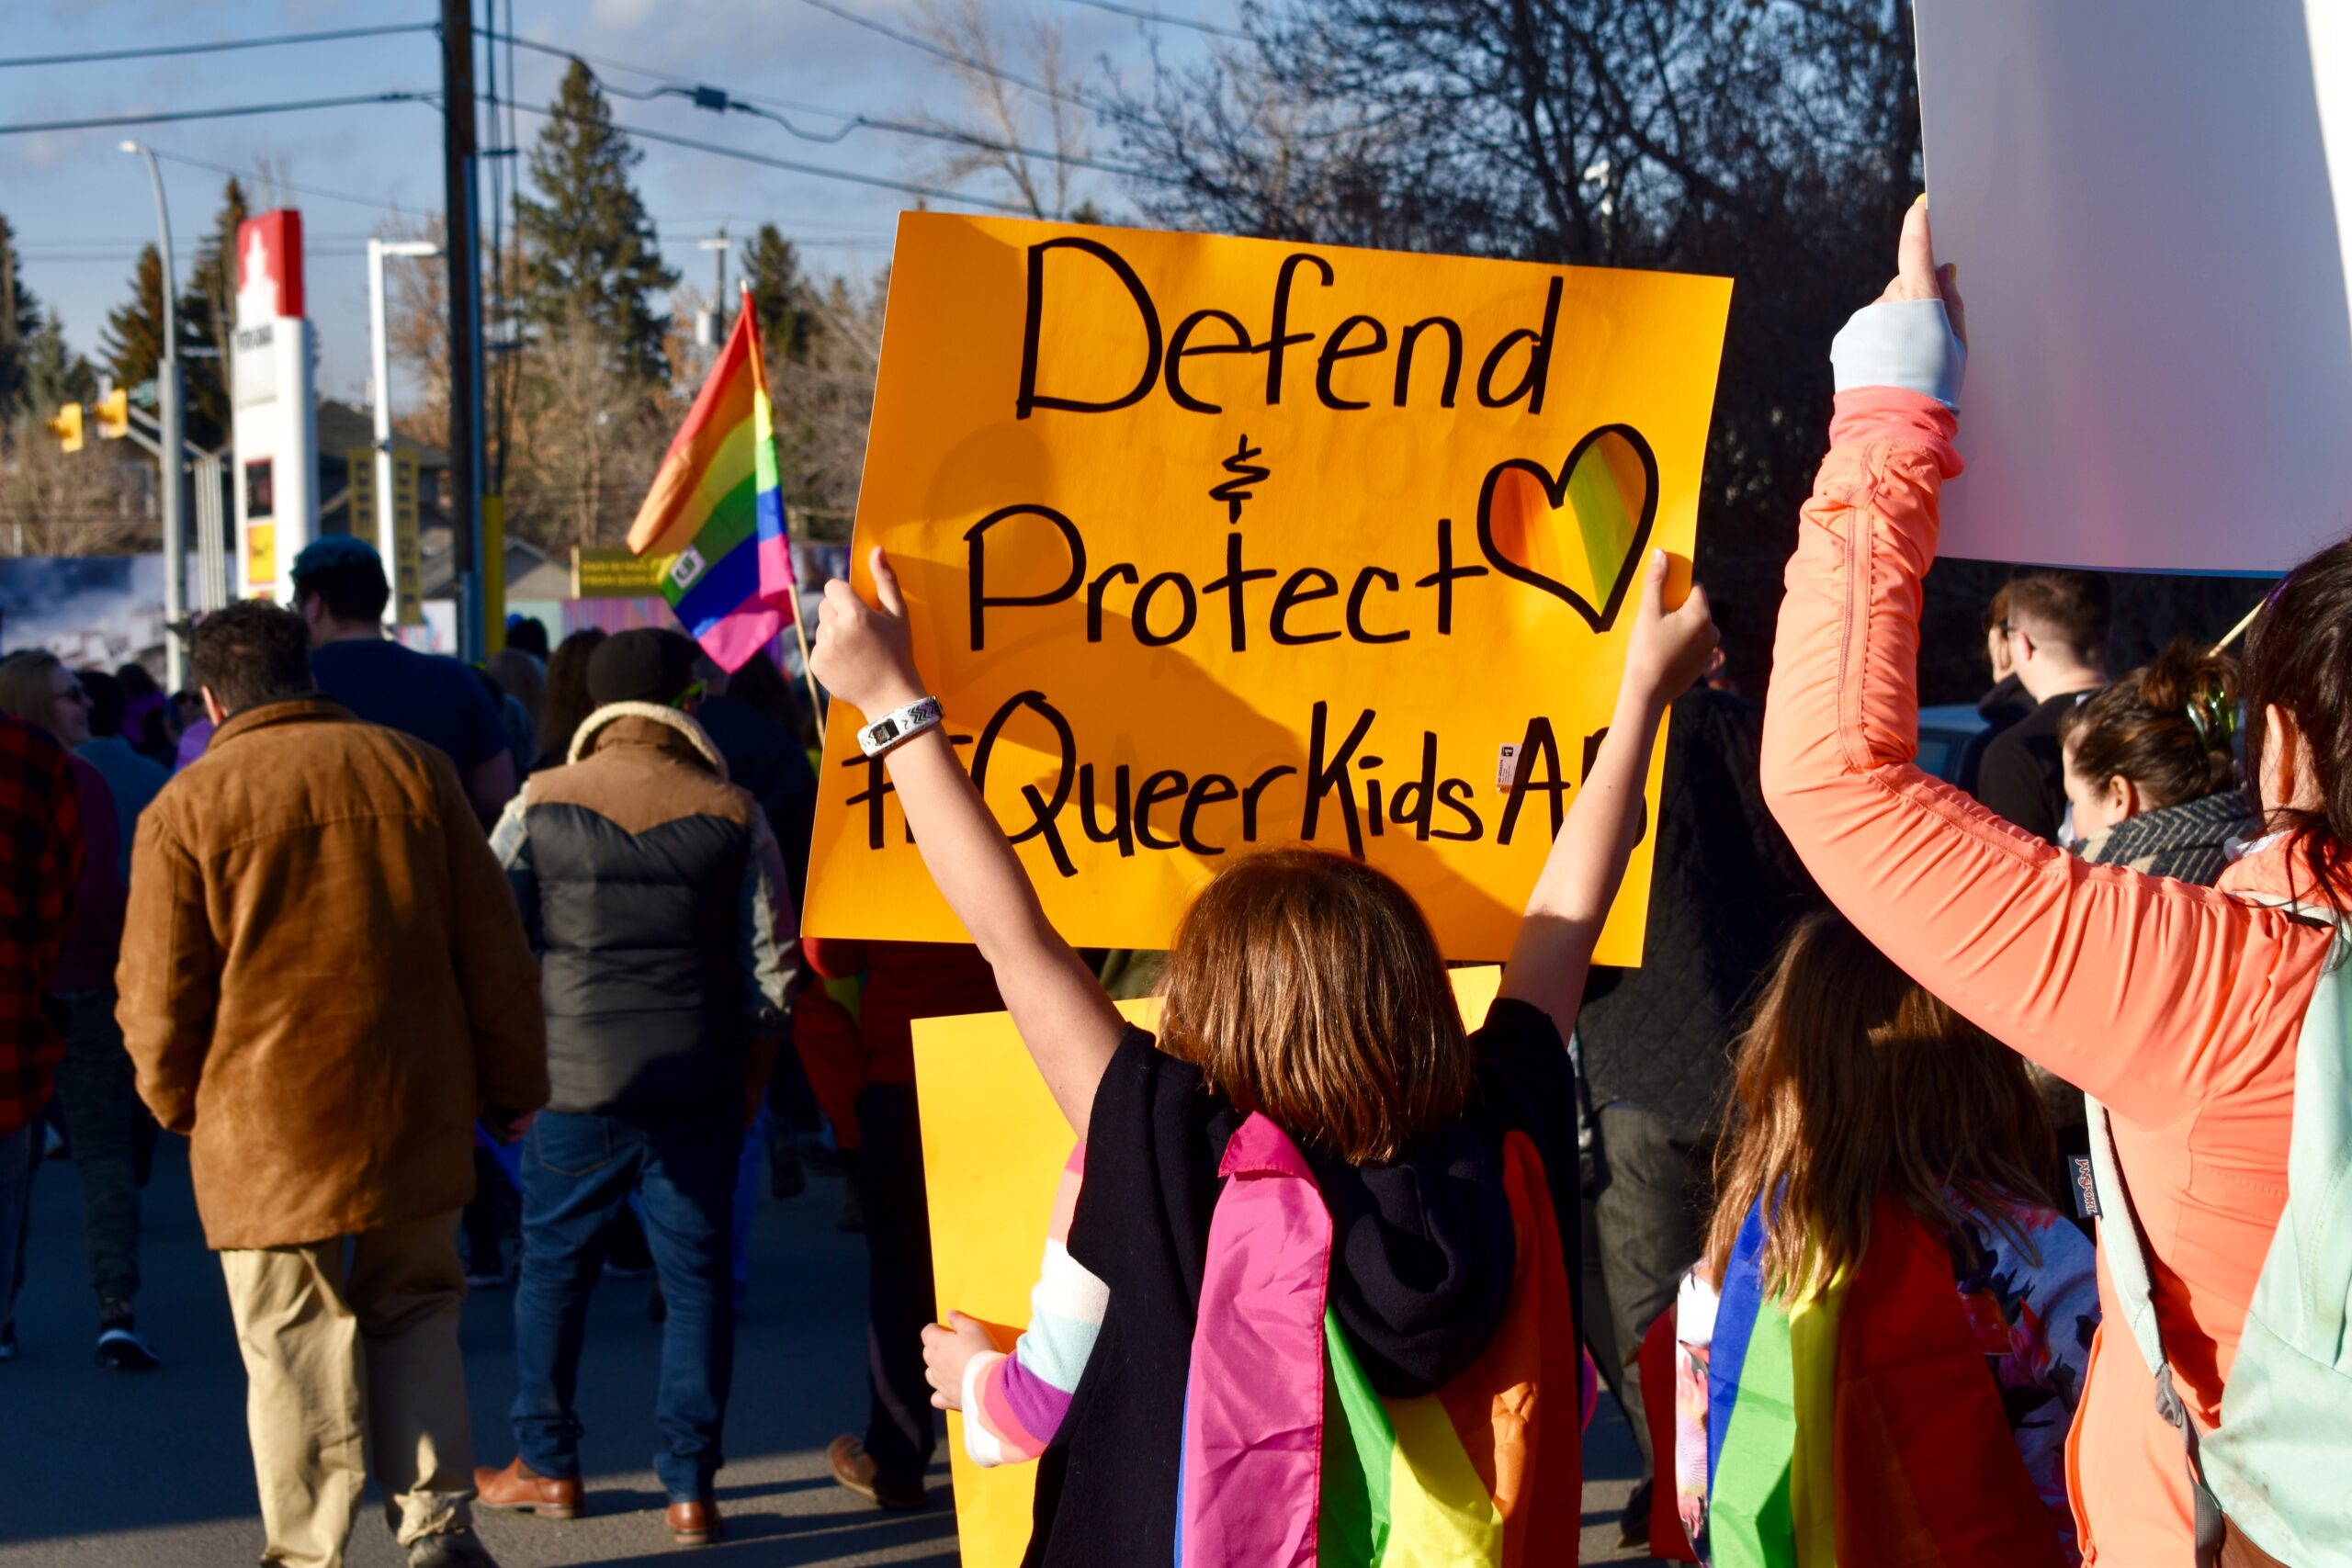 Image of people at a protest. One child holds up a sign that says Defend and Protect Queer Kids